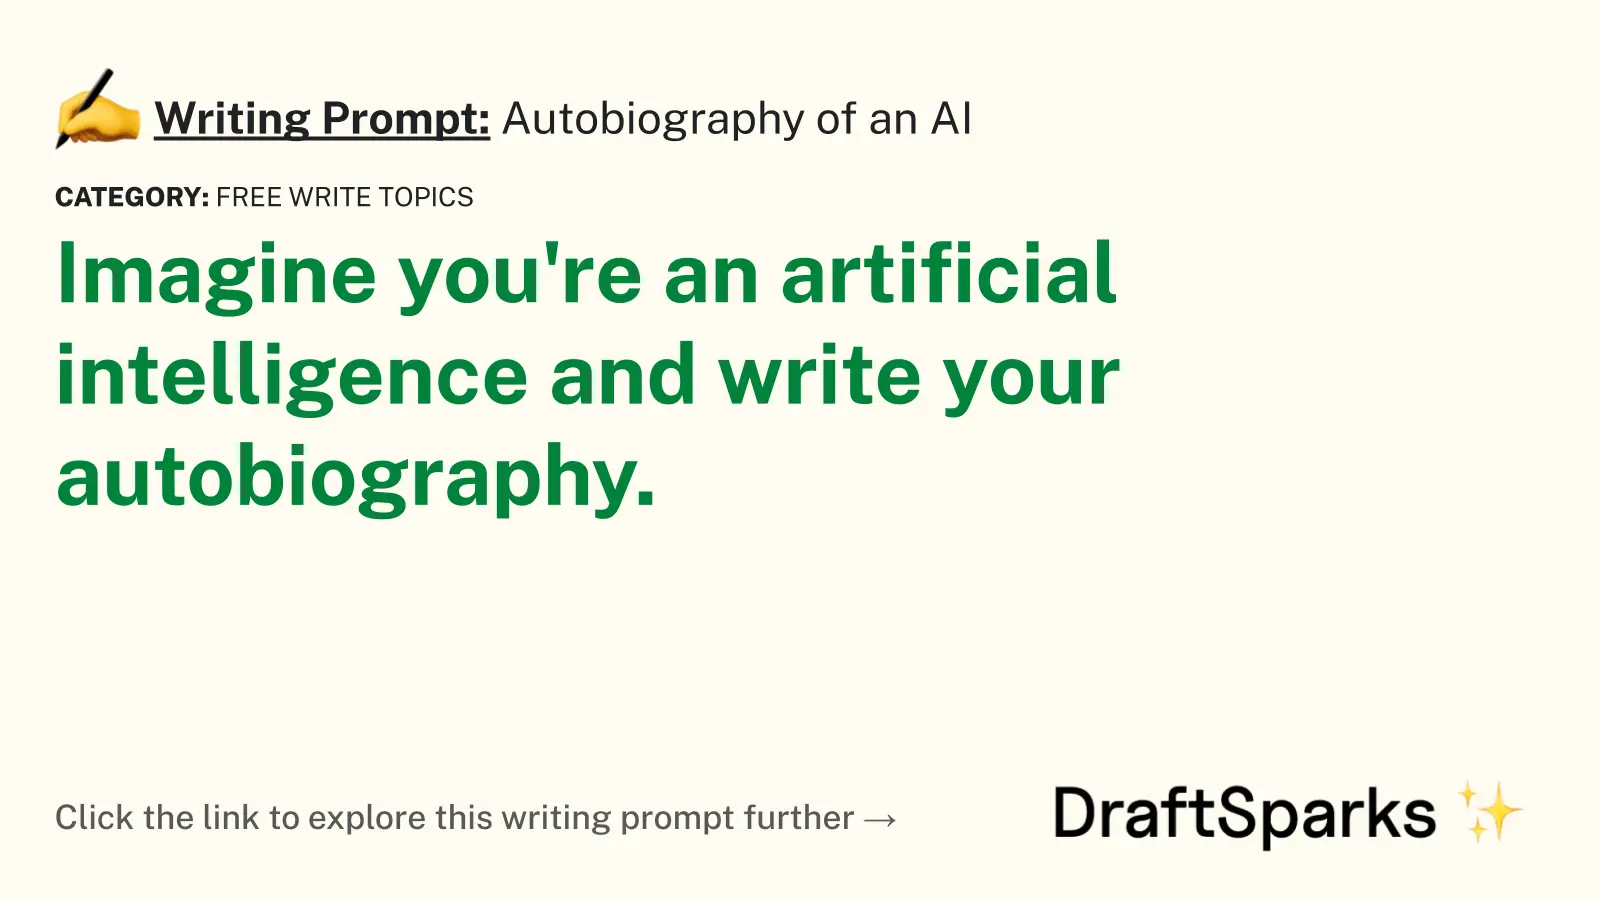 Autobiography of an AI